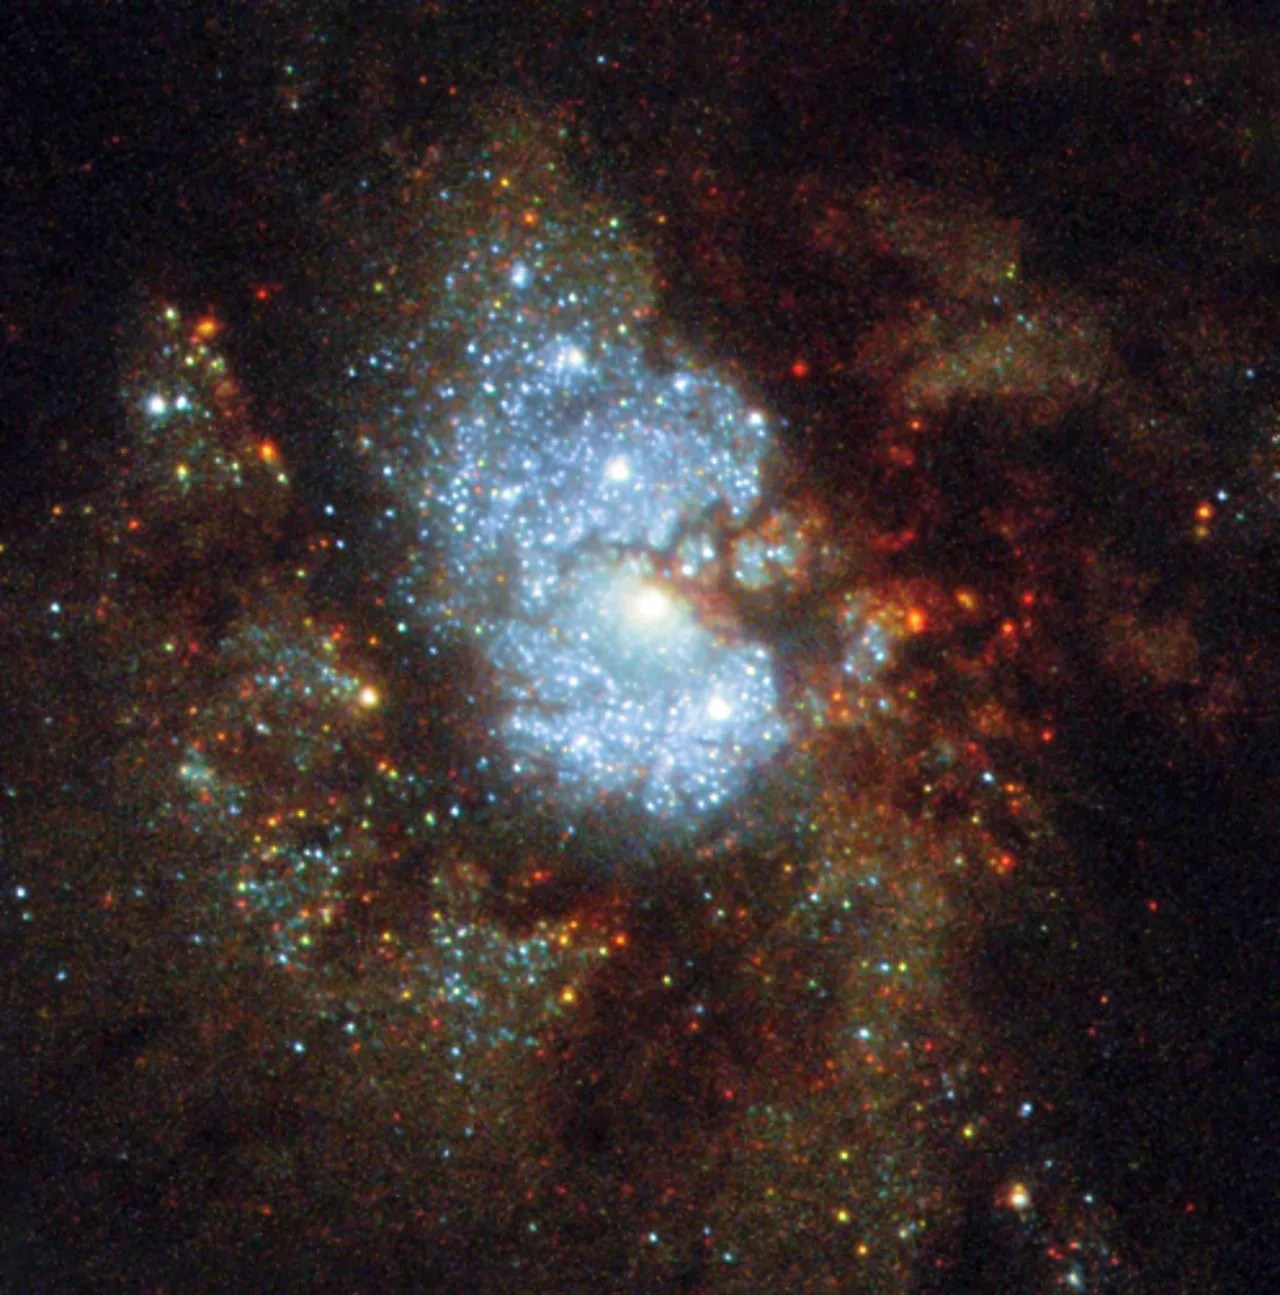 Bright central region with many bright, white stars creating a glowing section of dust and gas. Around that center there are darker clouds of dark orange with stars.